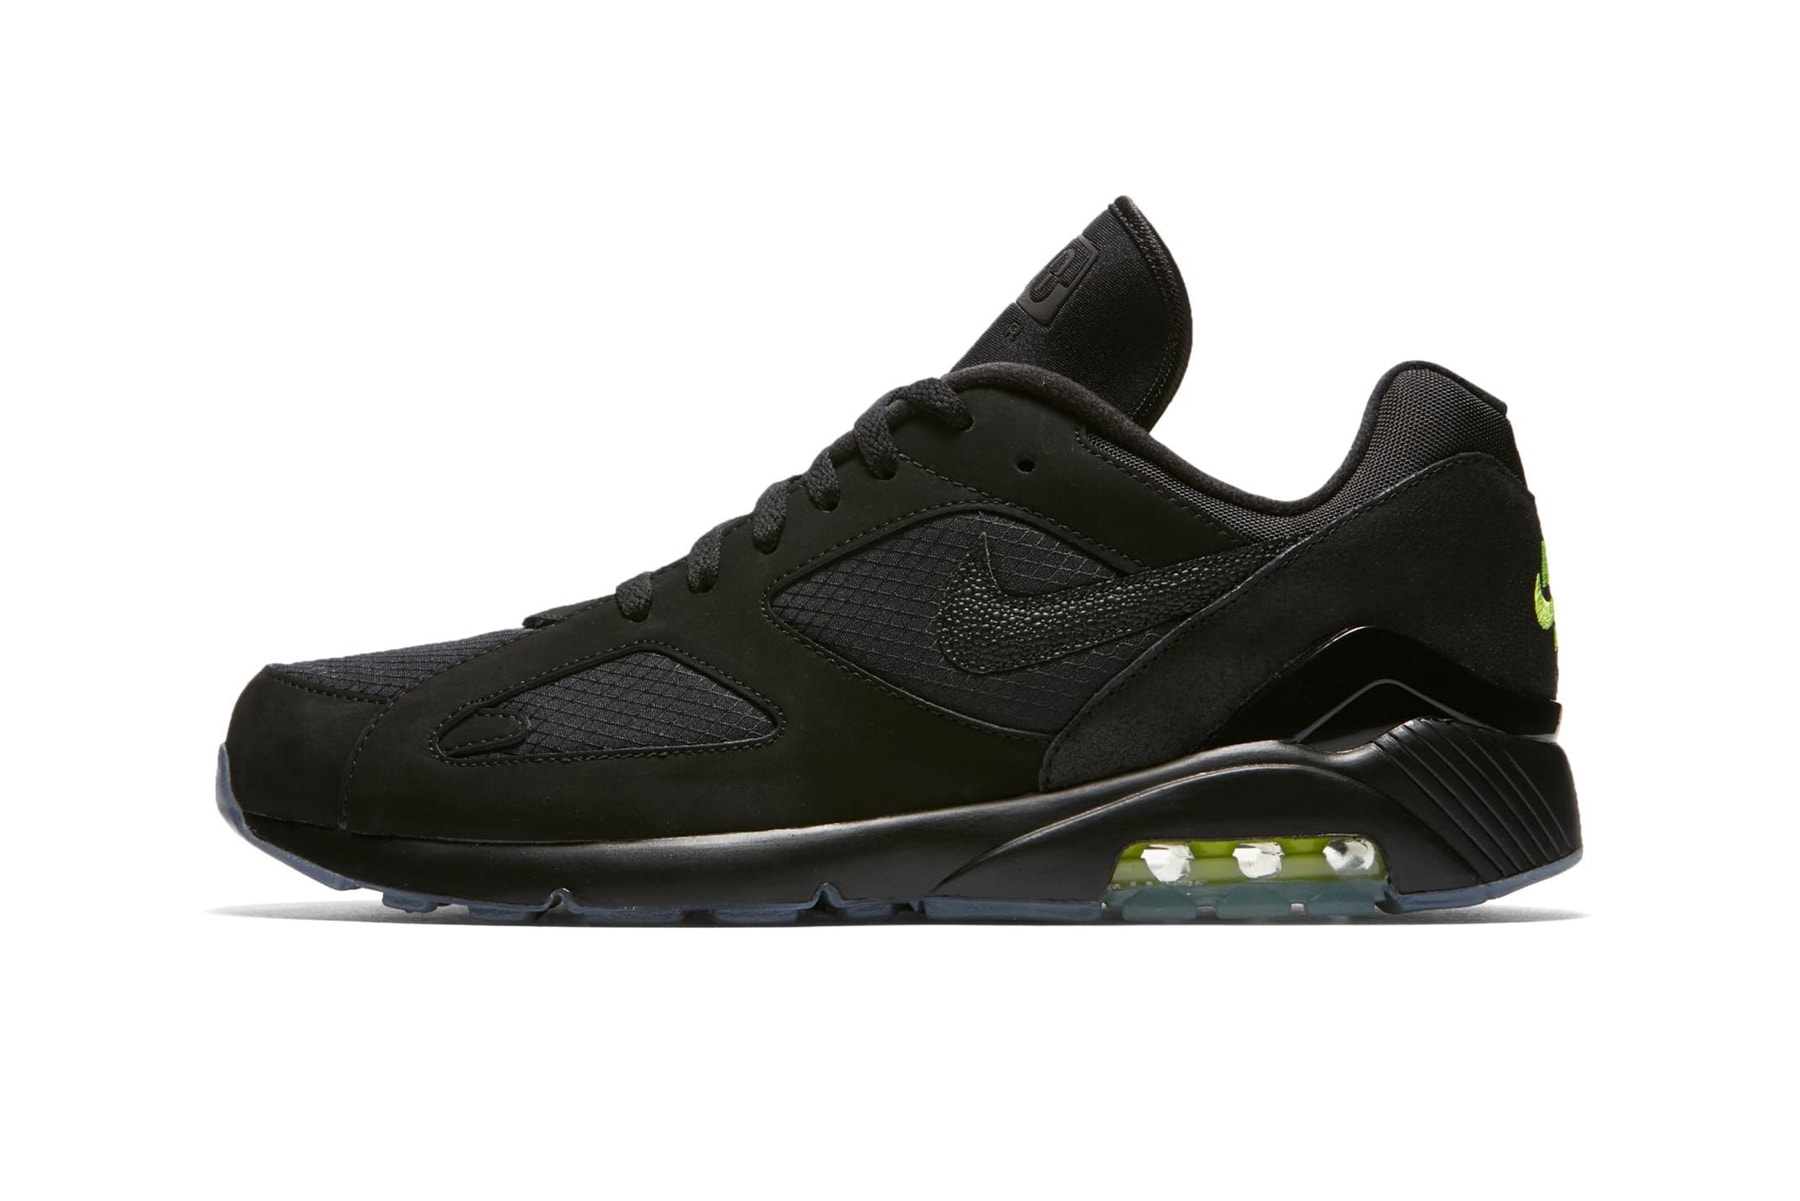 Nike Air Max 180 "Night Ops" Release Date sneaker black volt price buy online purchase stockists kicks